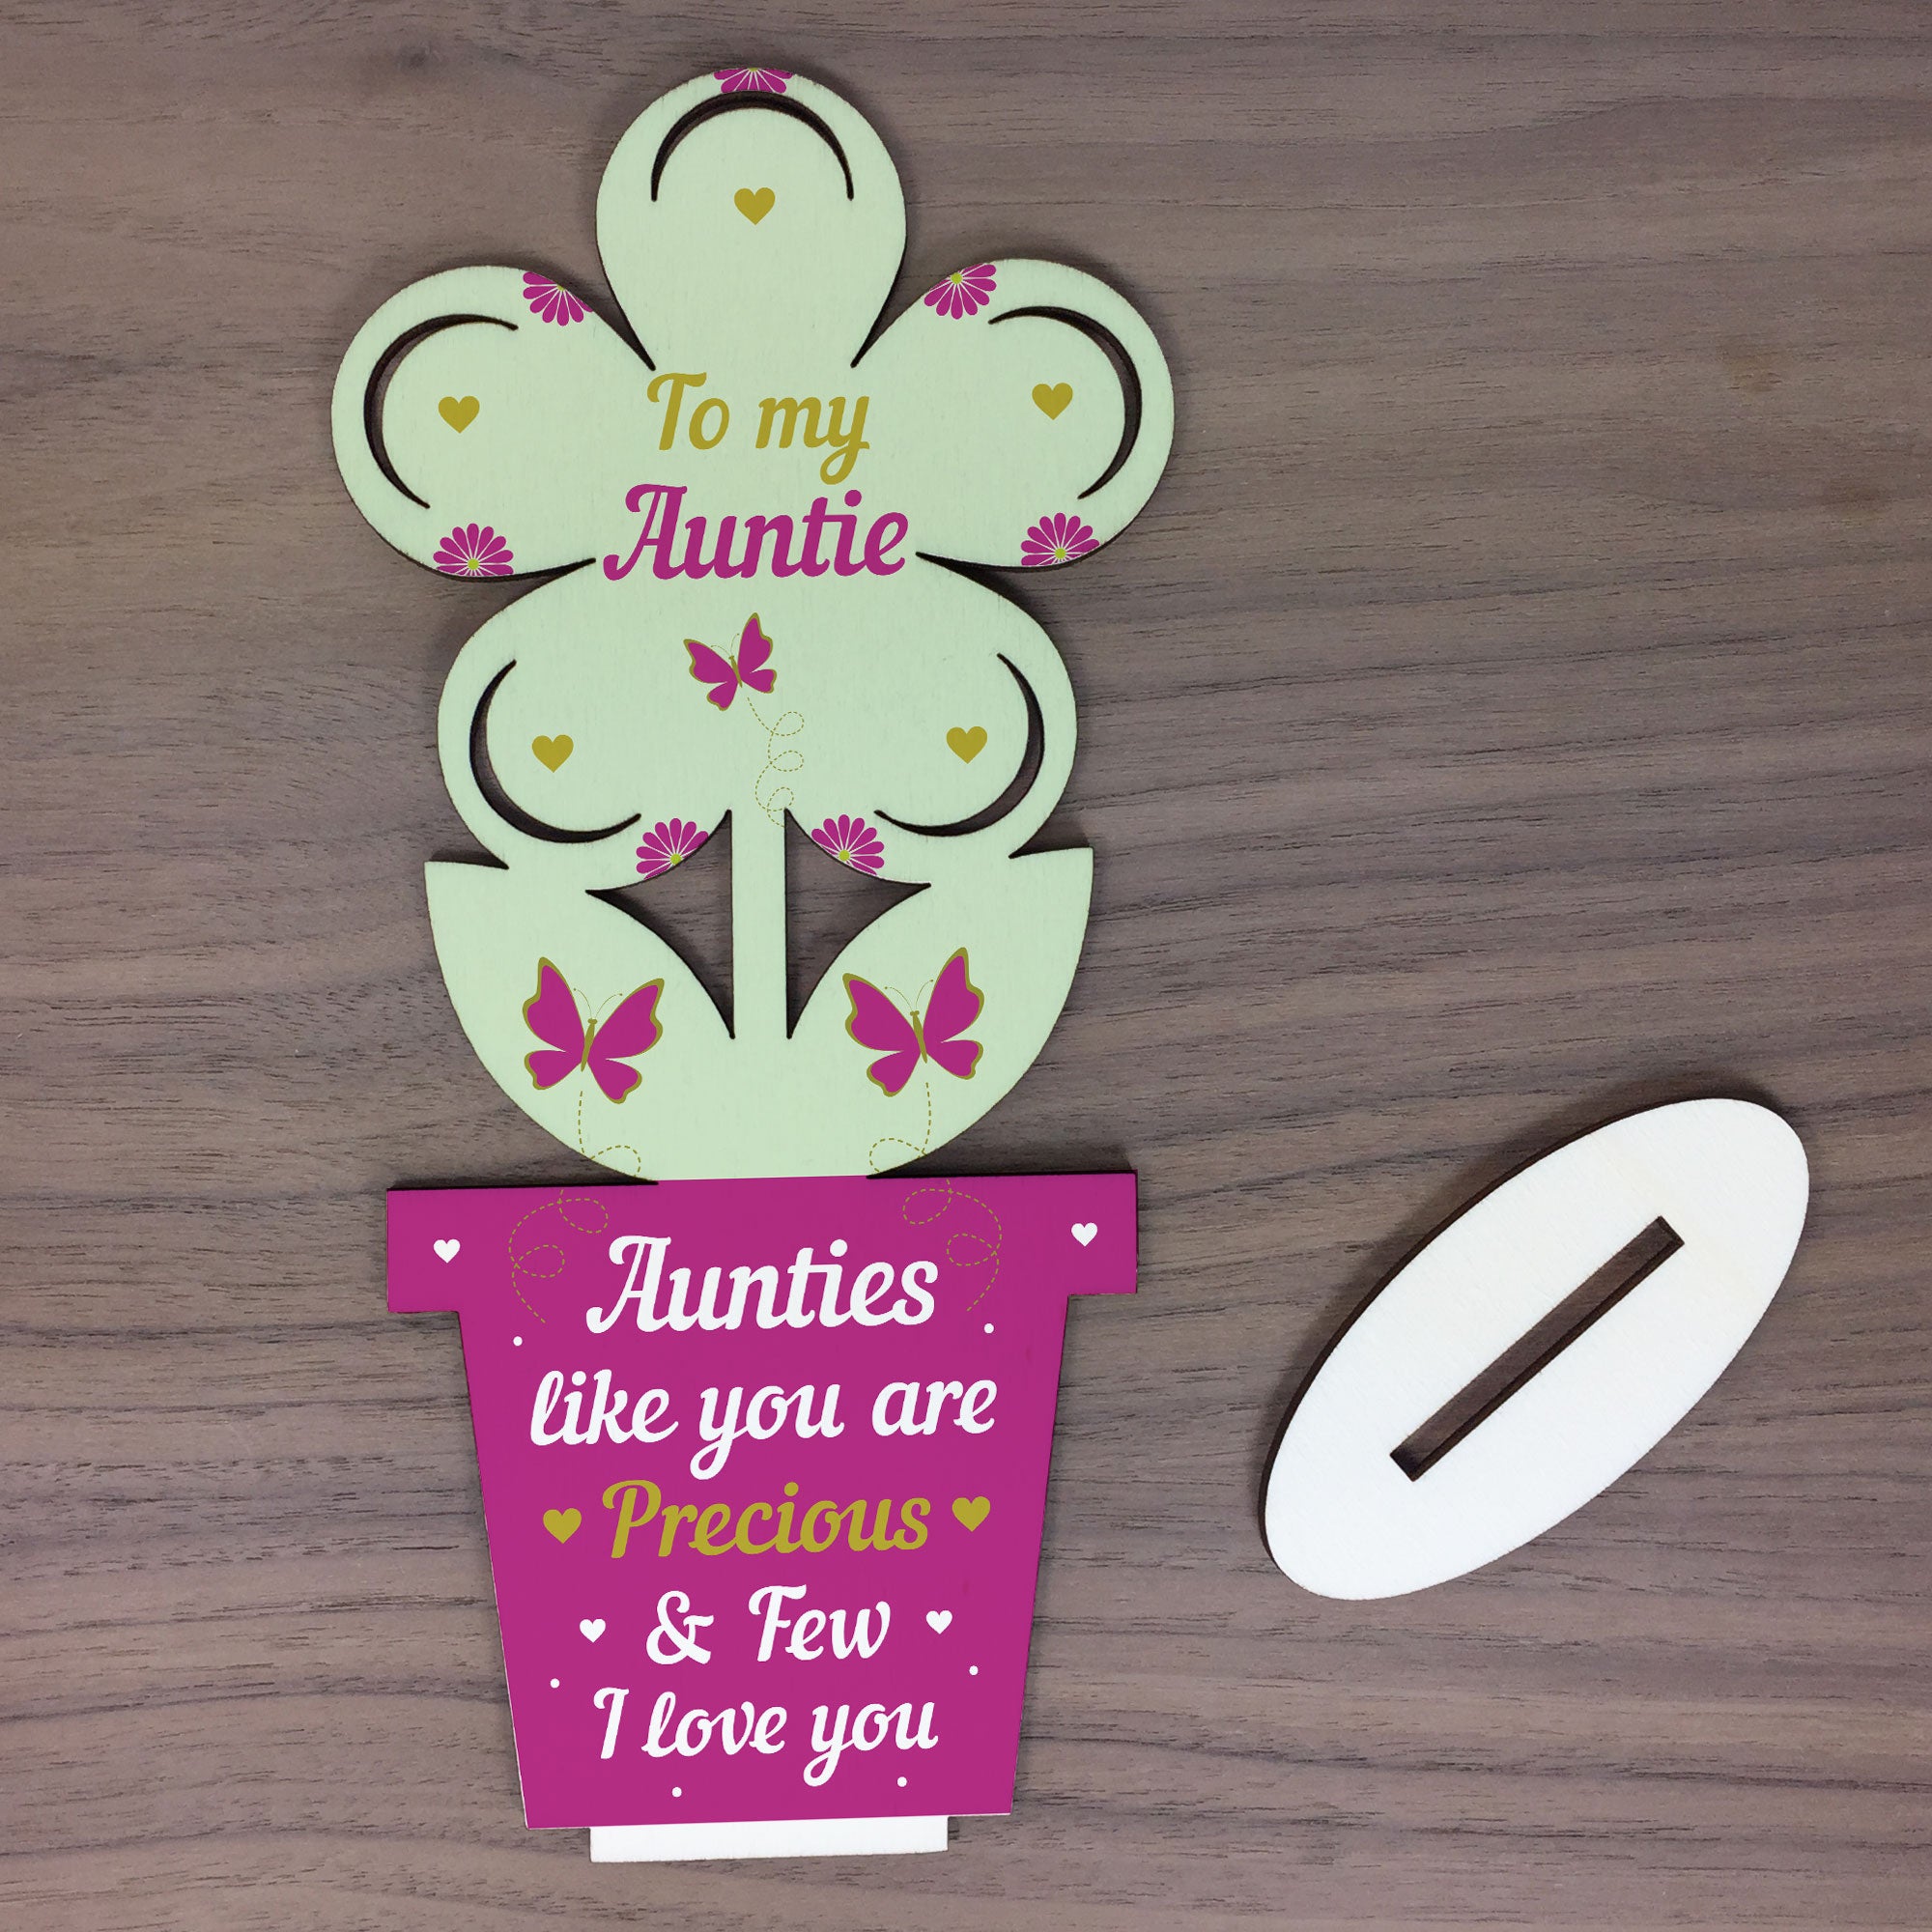 Personalized Gift for Aunt, Custom Book for Aunt, Birthday Gift for Auntie,  Gift for Aunt From Niece, Aunt Christmas Gift, Fill in the Blank - Etsy |  Christmas gifts for aunts, Aunt